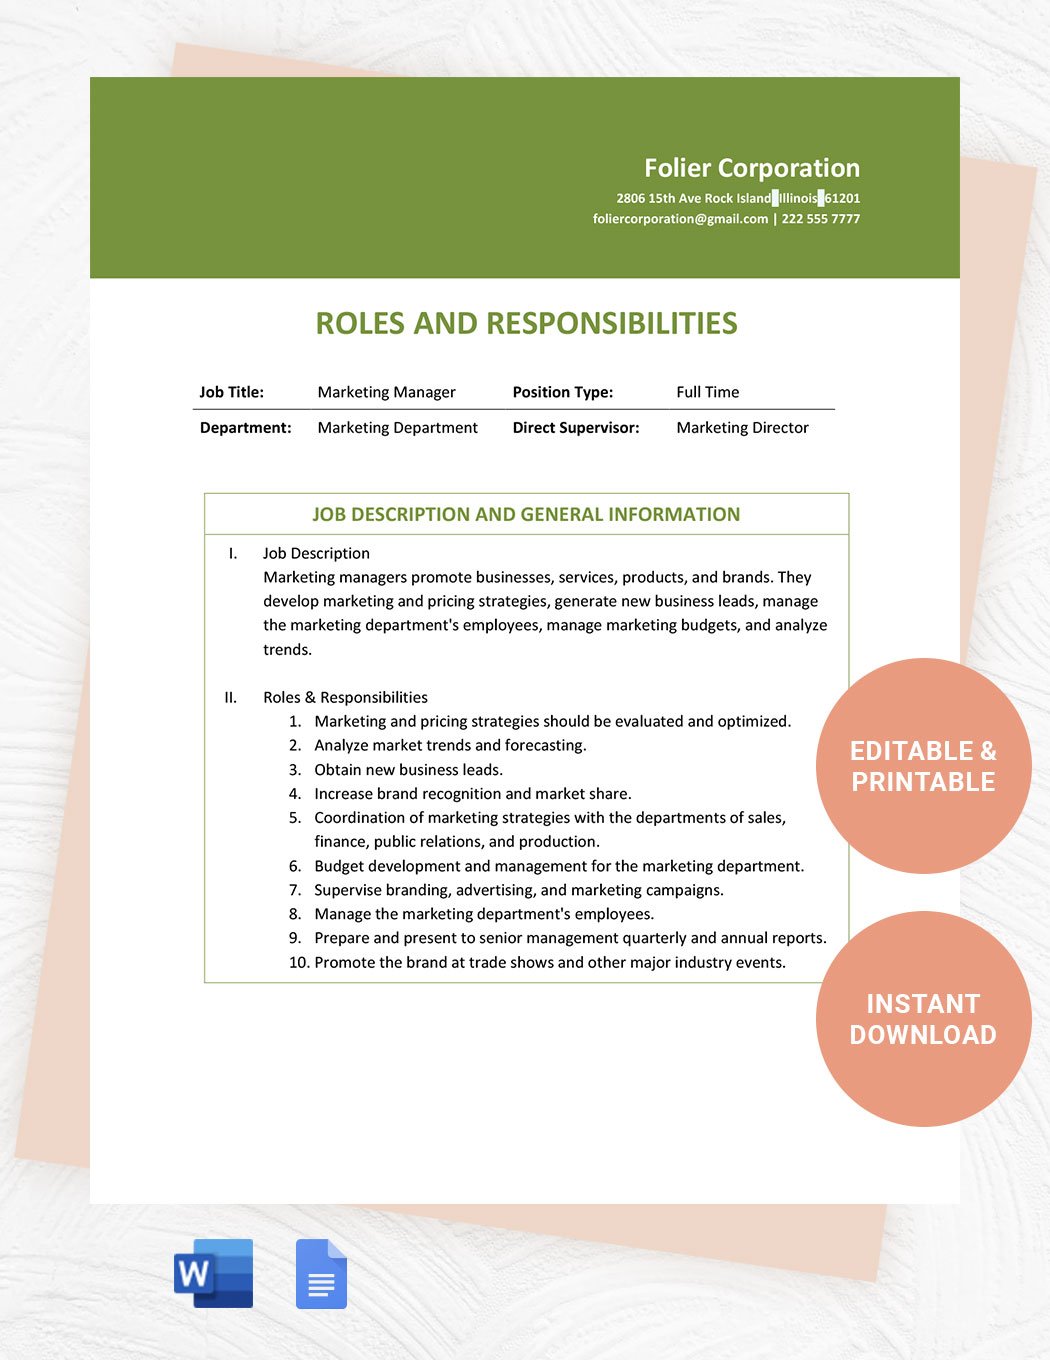 Corporate Roles And Responsibilities Template in Word, Google Docs